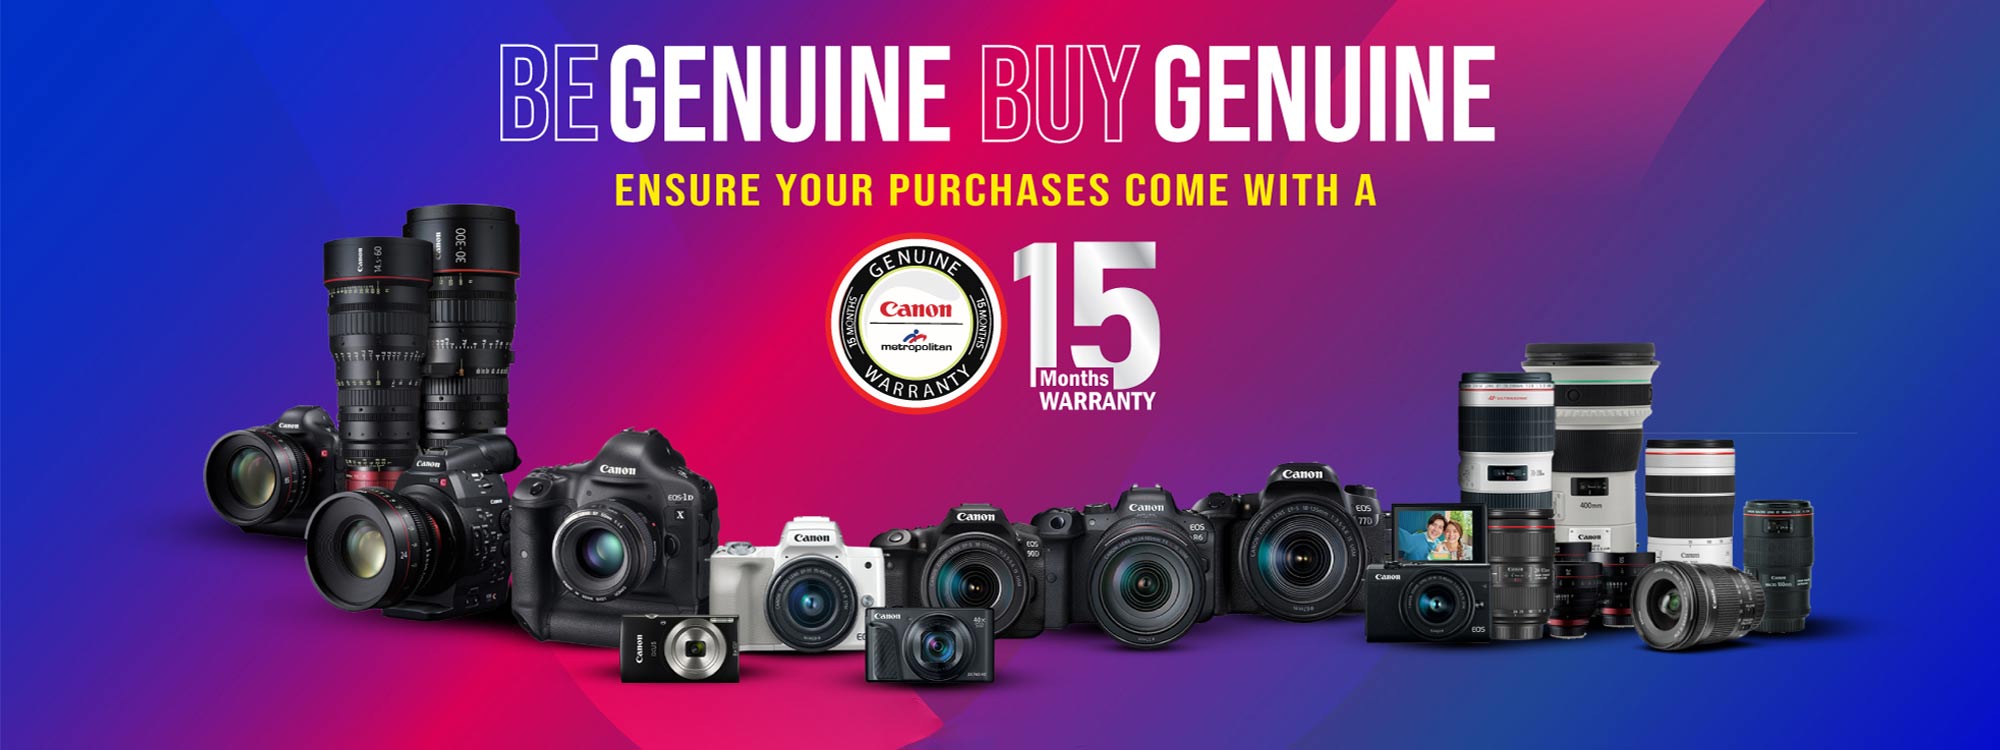 Be Genuine Buy Genuine with Canon Metropolitan 15 Months Agent Warranty